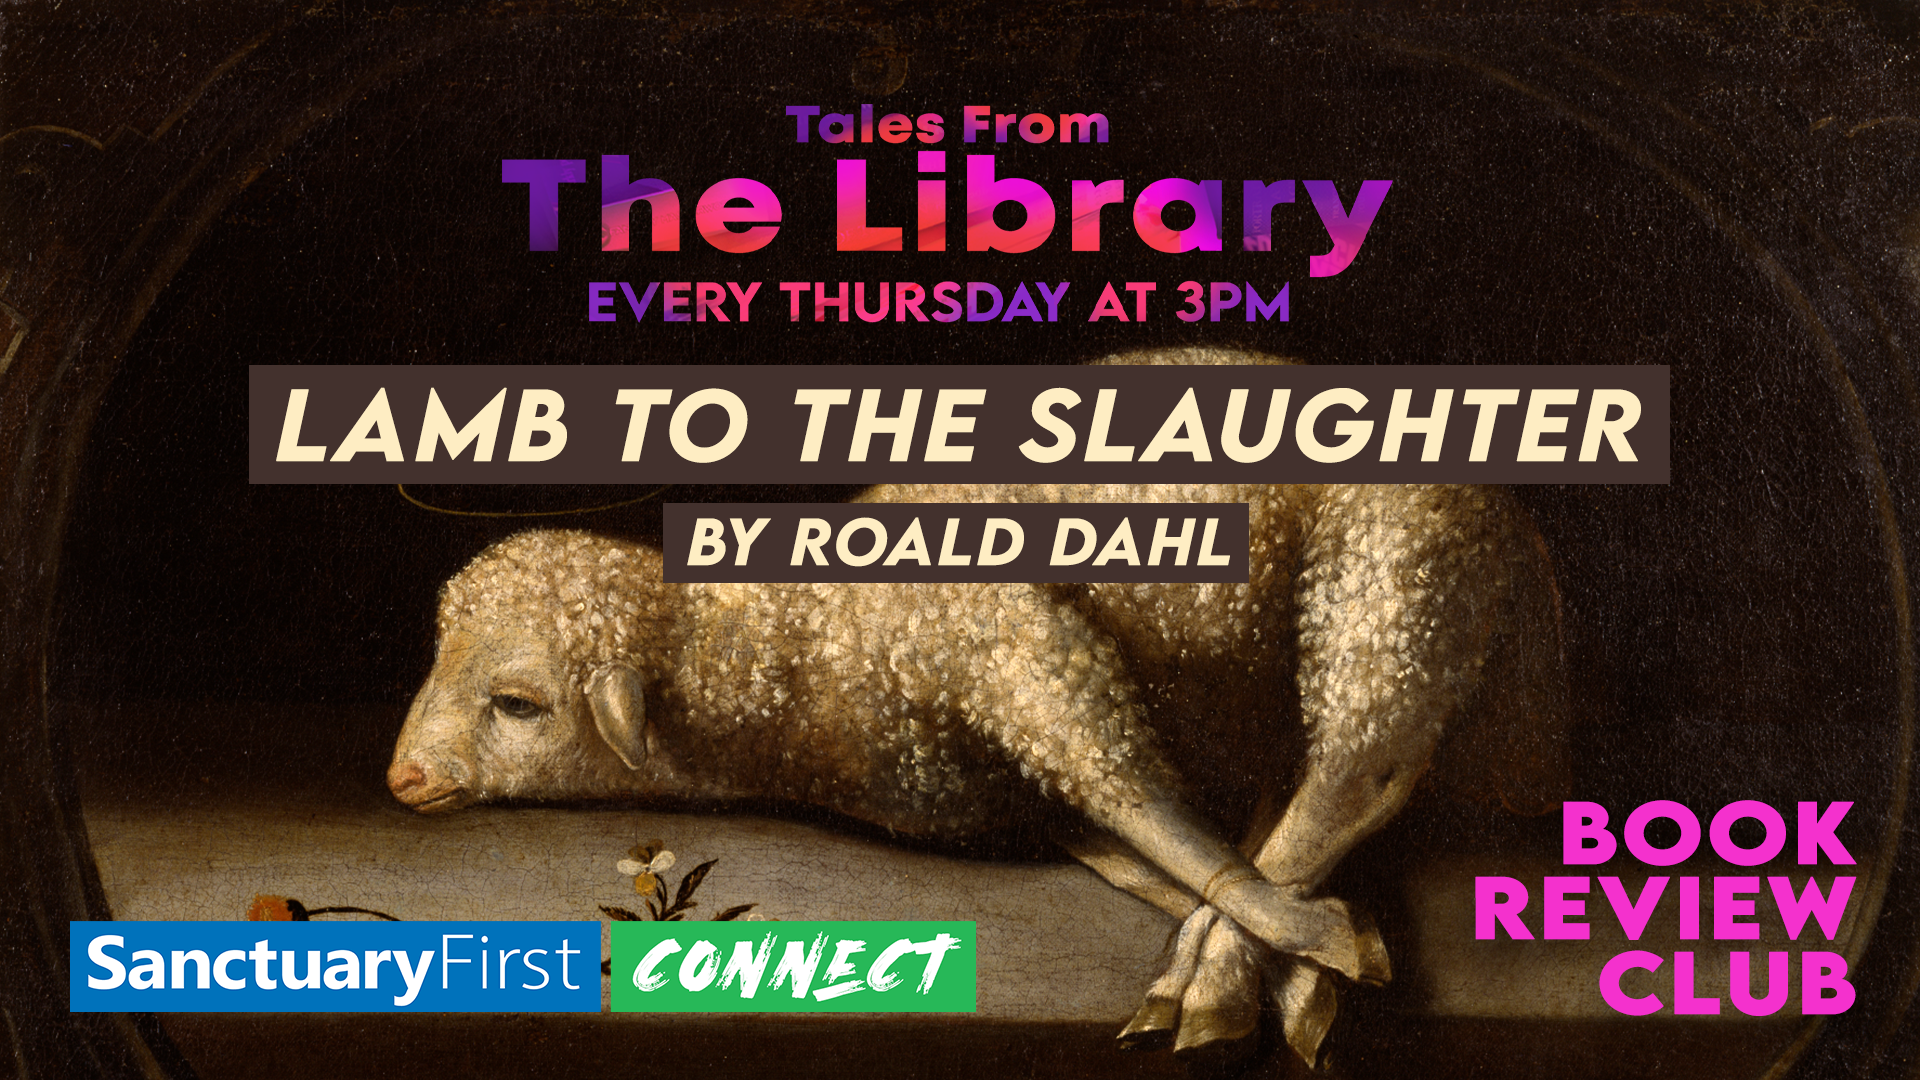 Tales From The Library - Lamb to the Slaughter